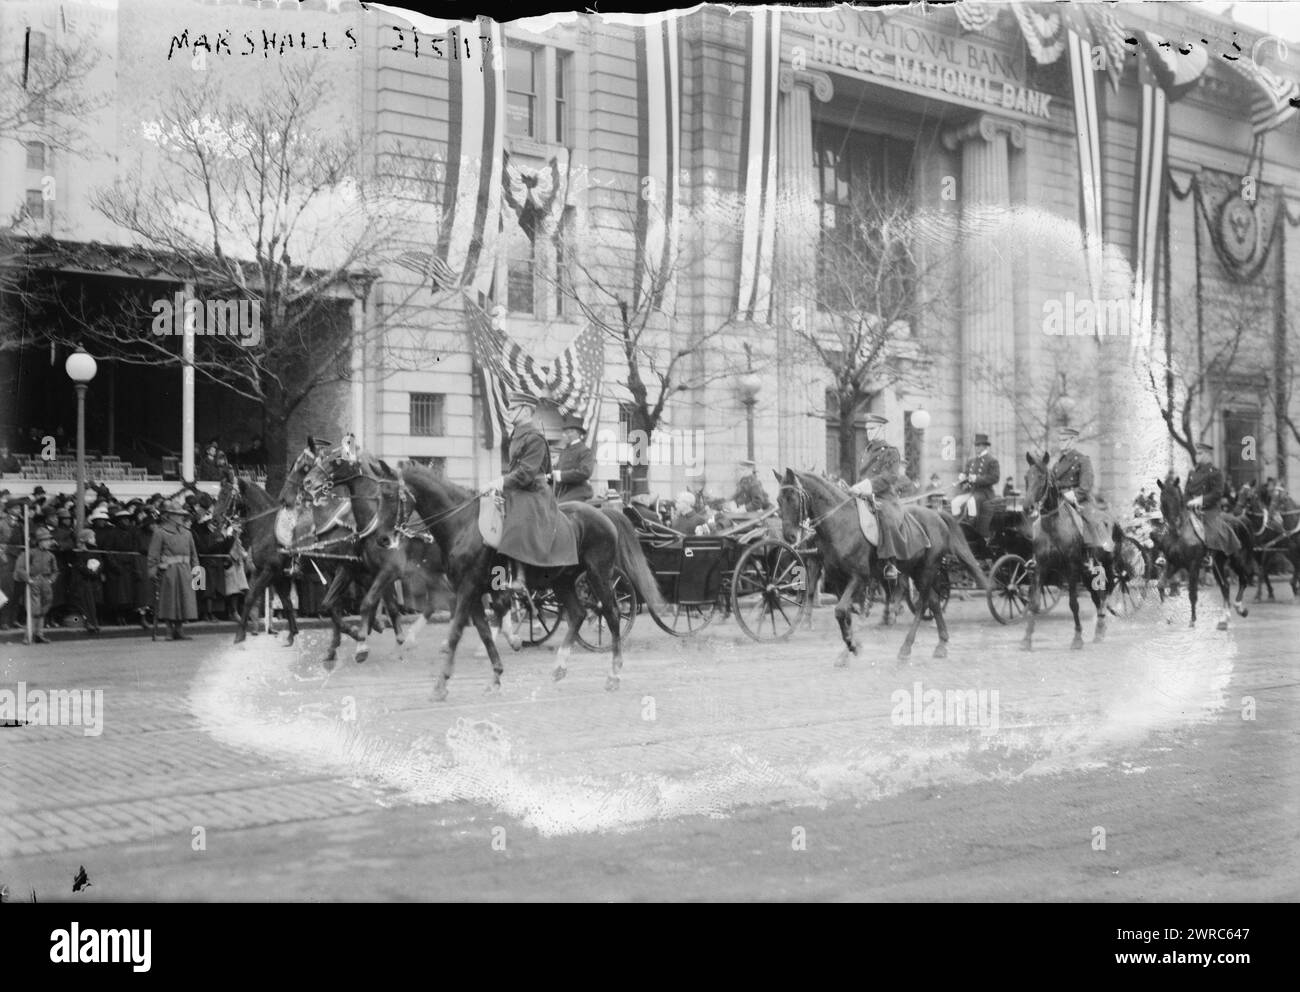 Marshalls, Photograph shows Vice President Thomas Riley Marshall in a carriage, passing the Riggs National Bank building on Pennsylvania Avenue during the parade for President Woodrow Wilson's second inauguration., 1917 March 5, Glass negatives, 1 negative: glass Stock Photo